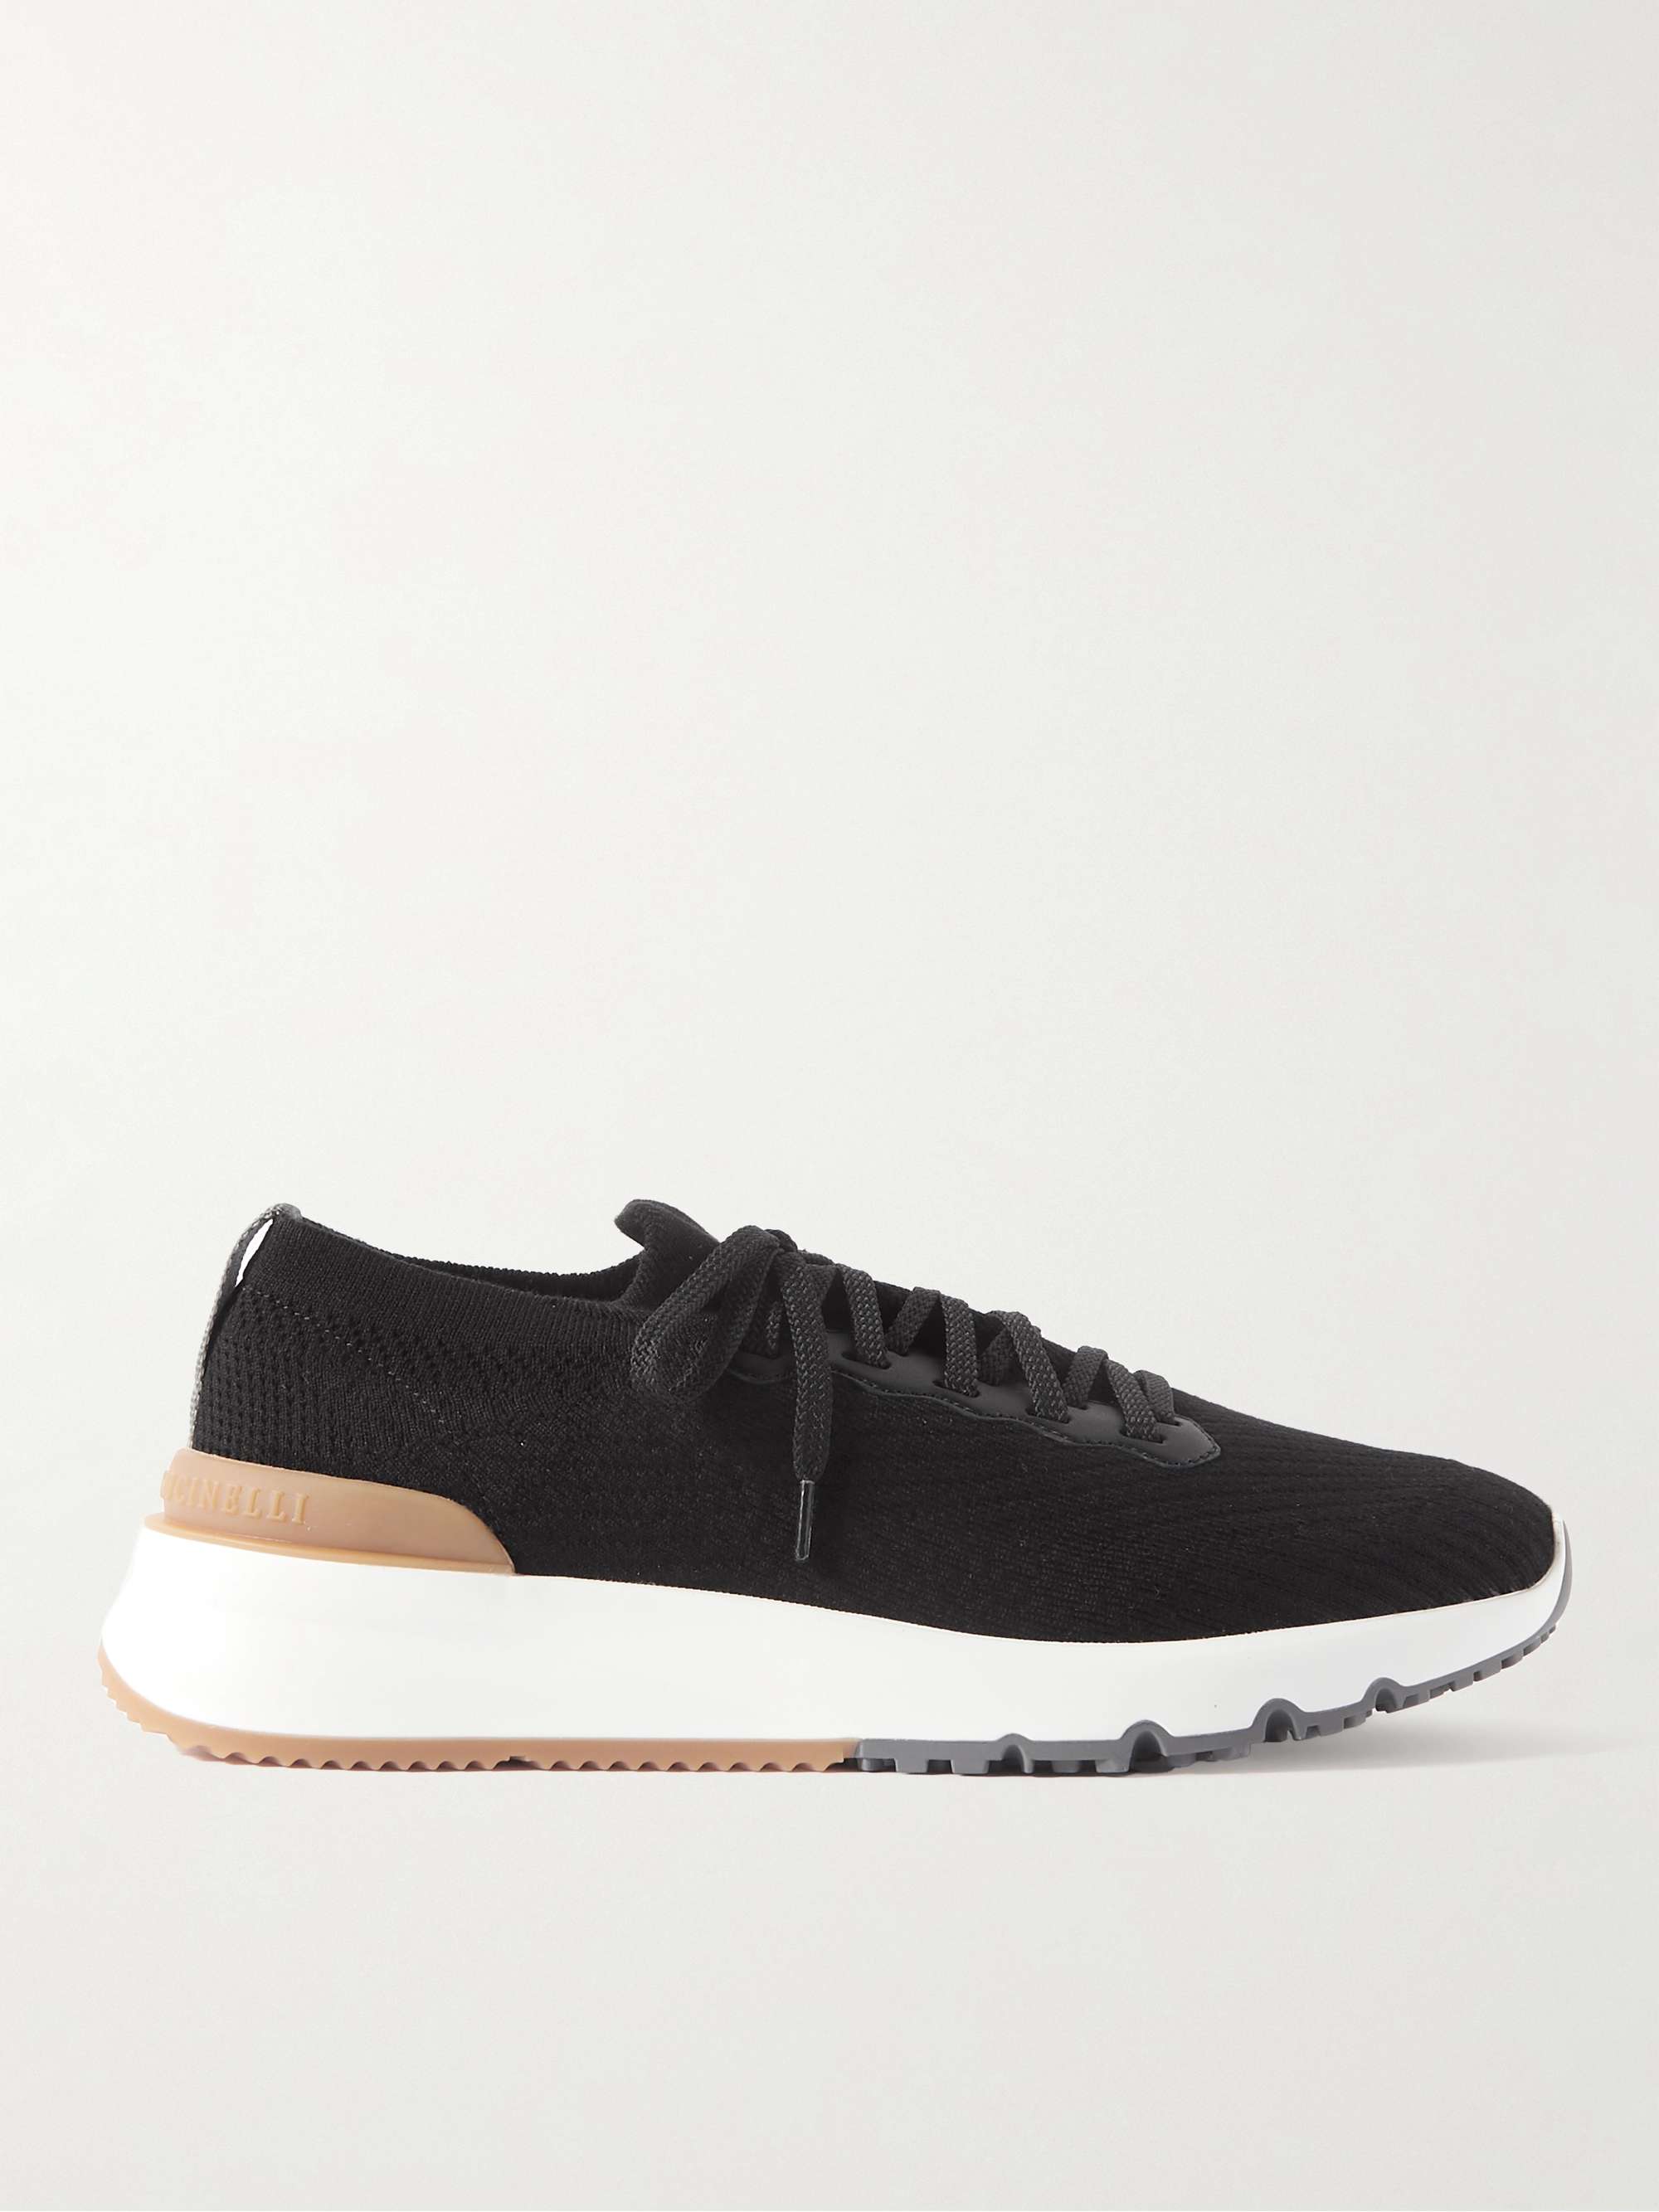 BRUNELLO CUCINELLI Leather-Trimmed Stretch-Knit Sneakers